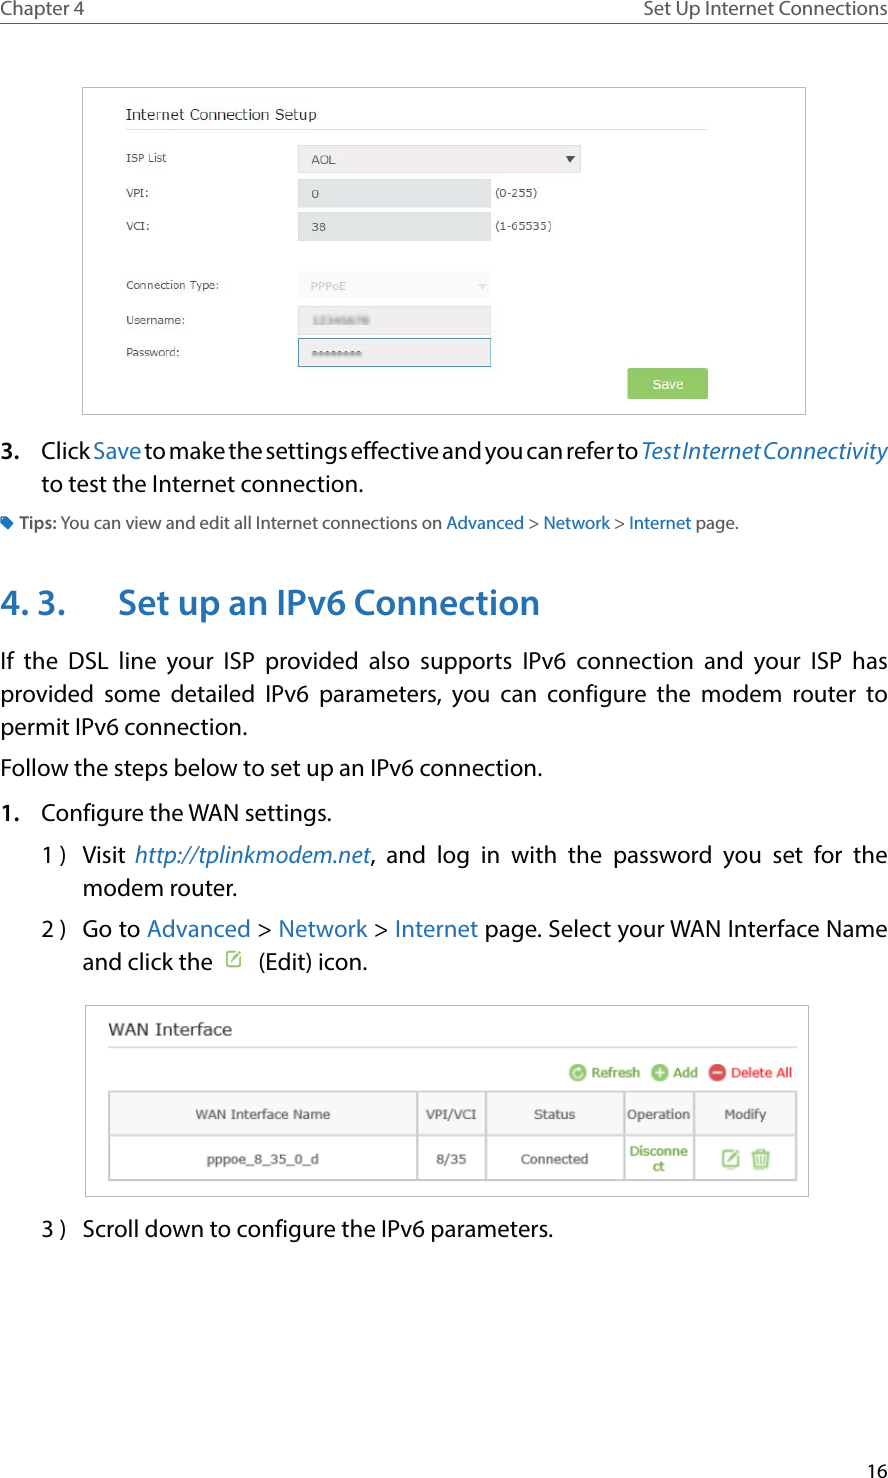 16Chapter 4 Set Up Internet Connections3.  Click Save to make the settings effective and you can refer to Test Internet Connectivity to test the Internet connection.Tips: You can view and edit all Internet connections on Advanced &gt; Network &gt; Internet page.4. 3.  Set up an IPv6 ConnectionIf the DSL line your ISP provided also supports IPv6 connection and your ISP has provided some detailed IPv6 parameters, you can configure the modem router to permit IPv6 connection.Follow the steps below to set up an IPv6 connection.1.  Configure the WAN settings.1 )  Visit http://tplinkmodem.net, and log in with the password you set for the modem router.2 )  Go to Advanced &gt; Network &gt; Internet page. Select your WAN Interface Name and click the    (Edit) icon.  3 )  Scroll down to configure the IPv6 parameters.